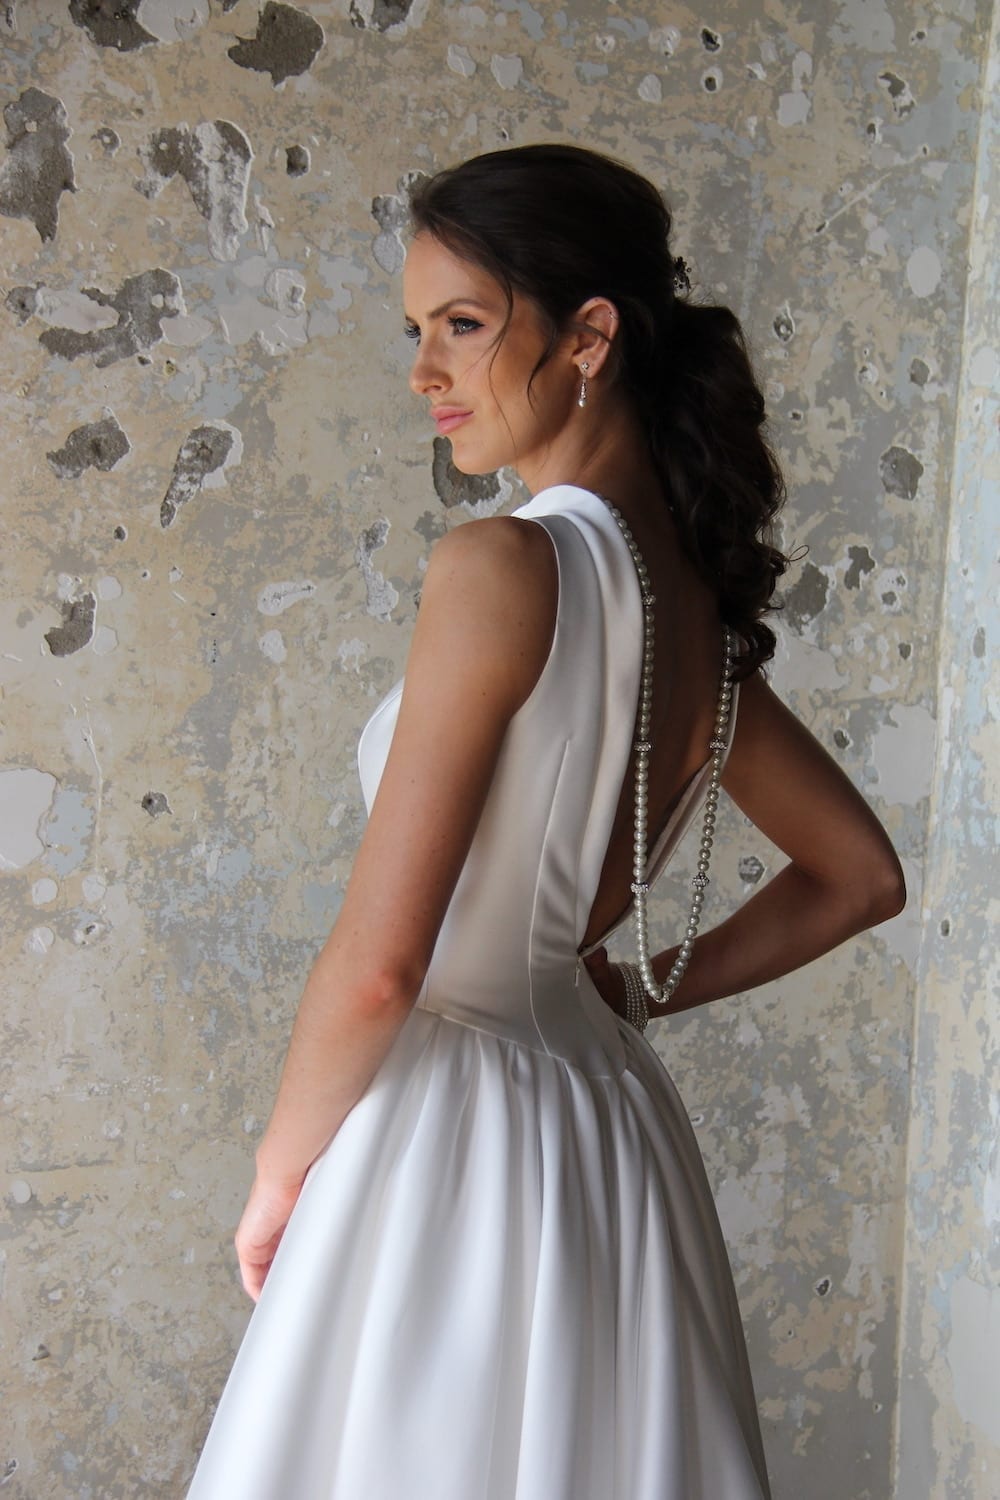 Female model wearing Vinka Design Modern Muse Wedding Dress. In chic warehouse the side detail of a gown with a high neckline and collar into a low back with a cinched waist and full Mikado satin skirt.